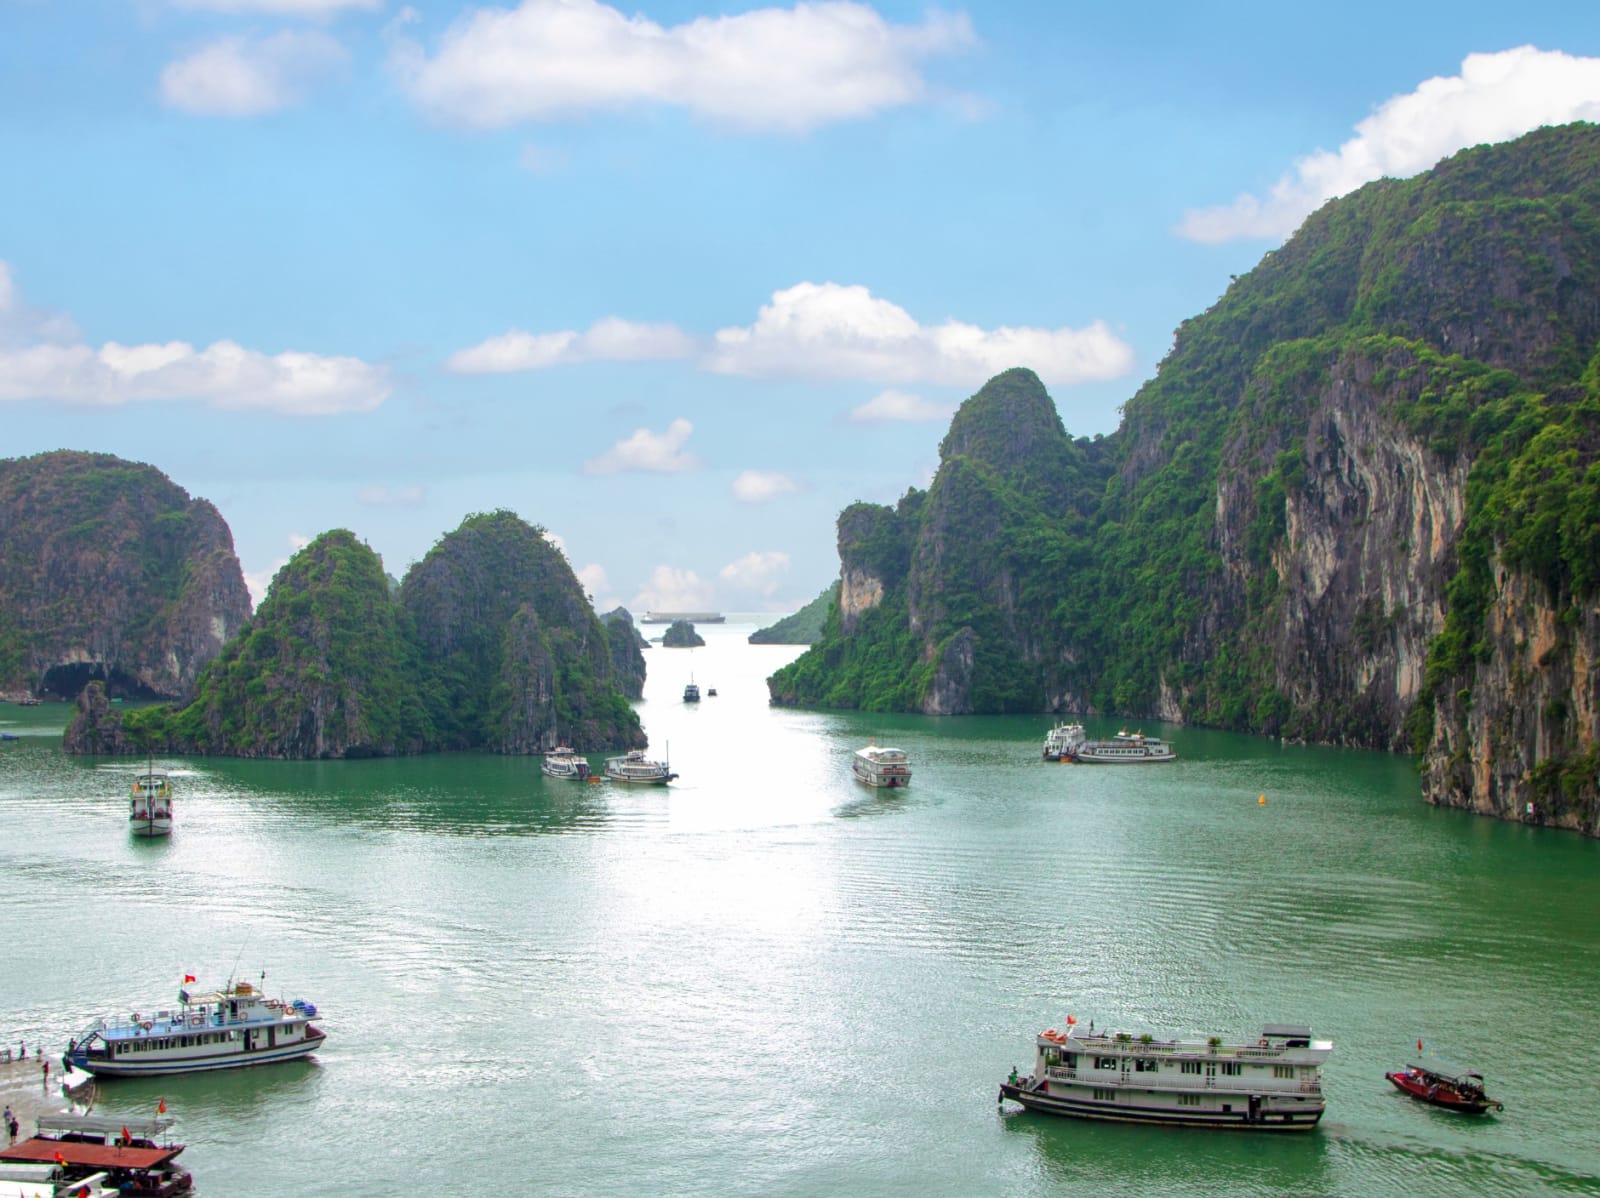 Overview of Halong Bay